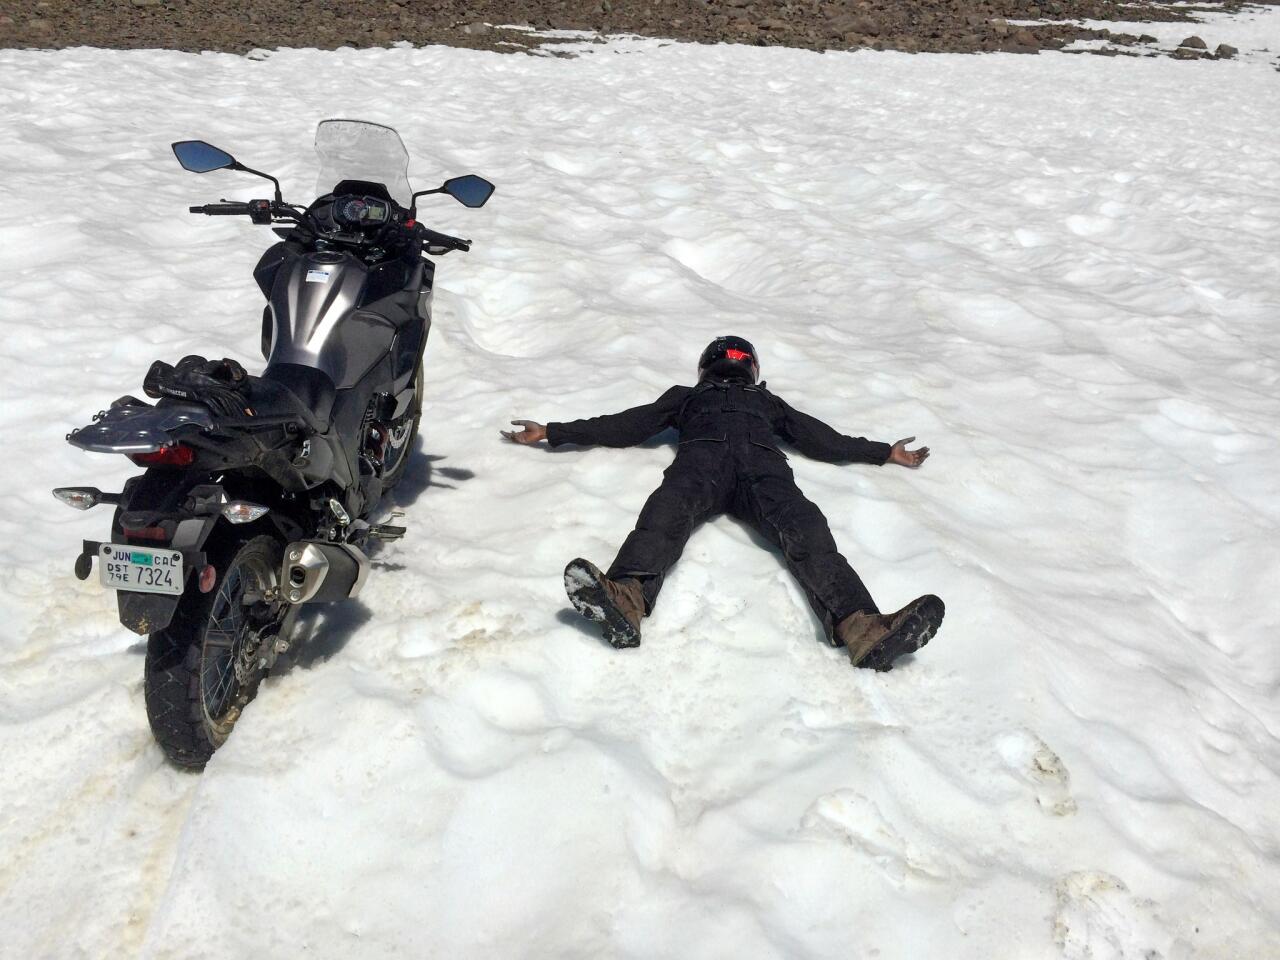 We didn't expect to see snow in July, even at 12,000 feet. Abhi expressed his enthusiasm by riding t